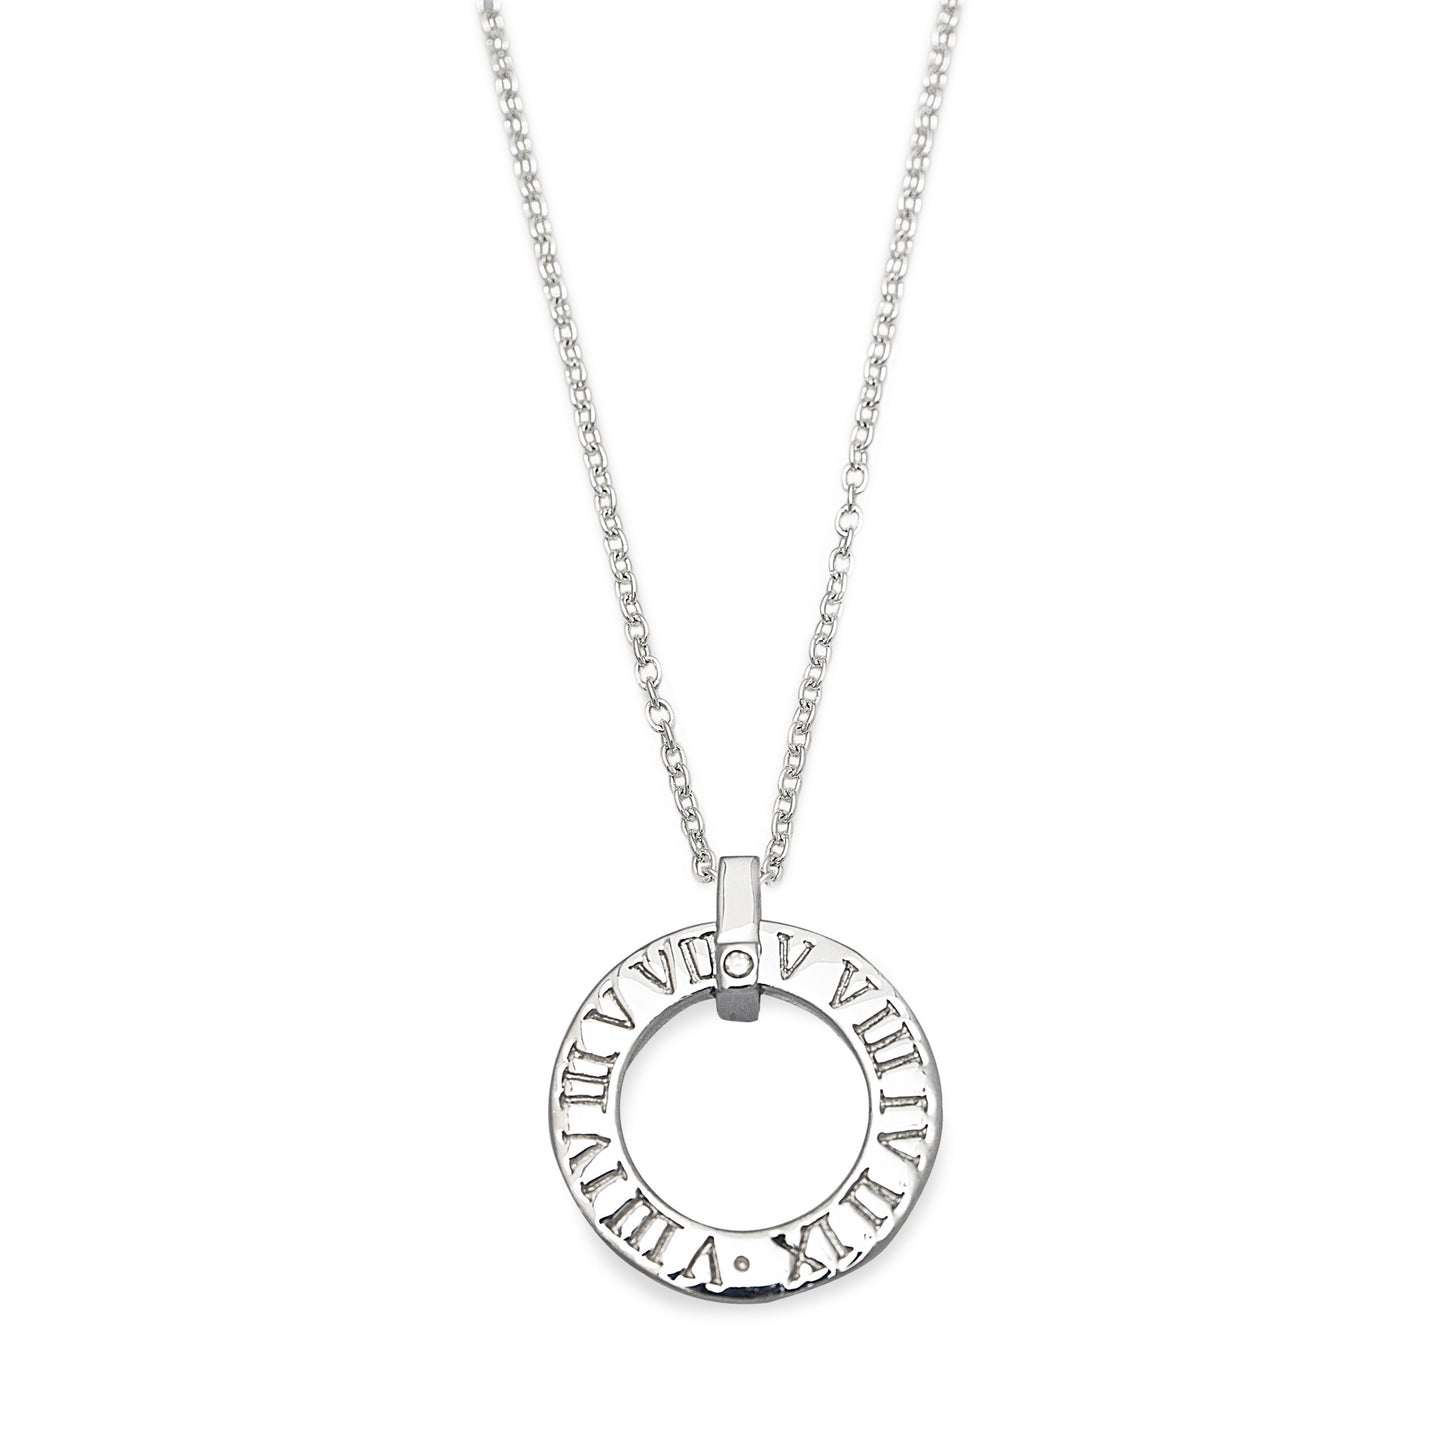 'O' shape Roman Bliss Necklace in 925 sterling silver and features our signature Roman numerals and a single cubic zirconia. Worldwide shipping. Affordable luxury jewellery by Bellagio & Co.